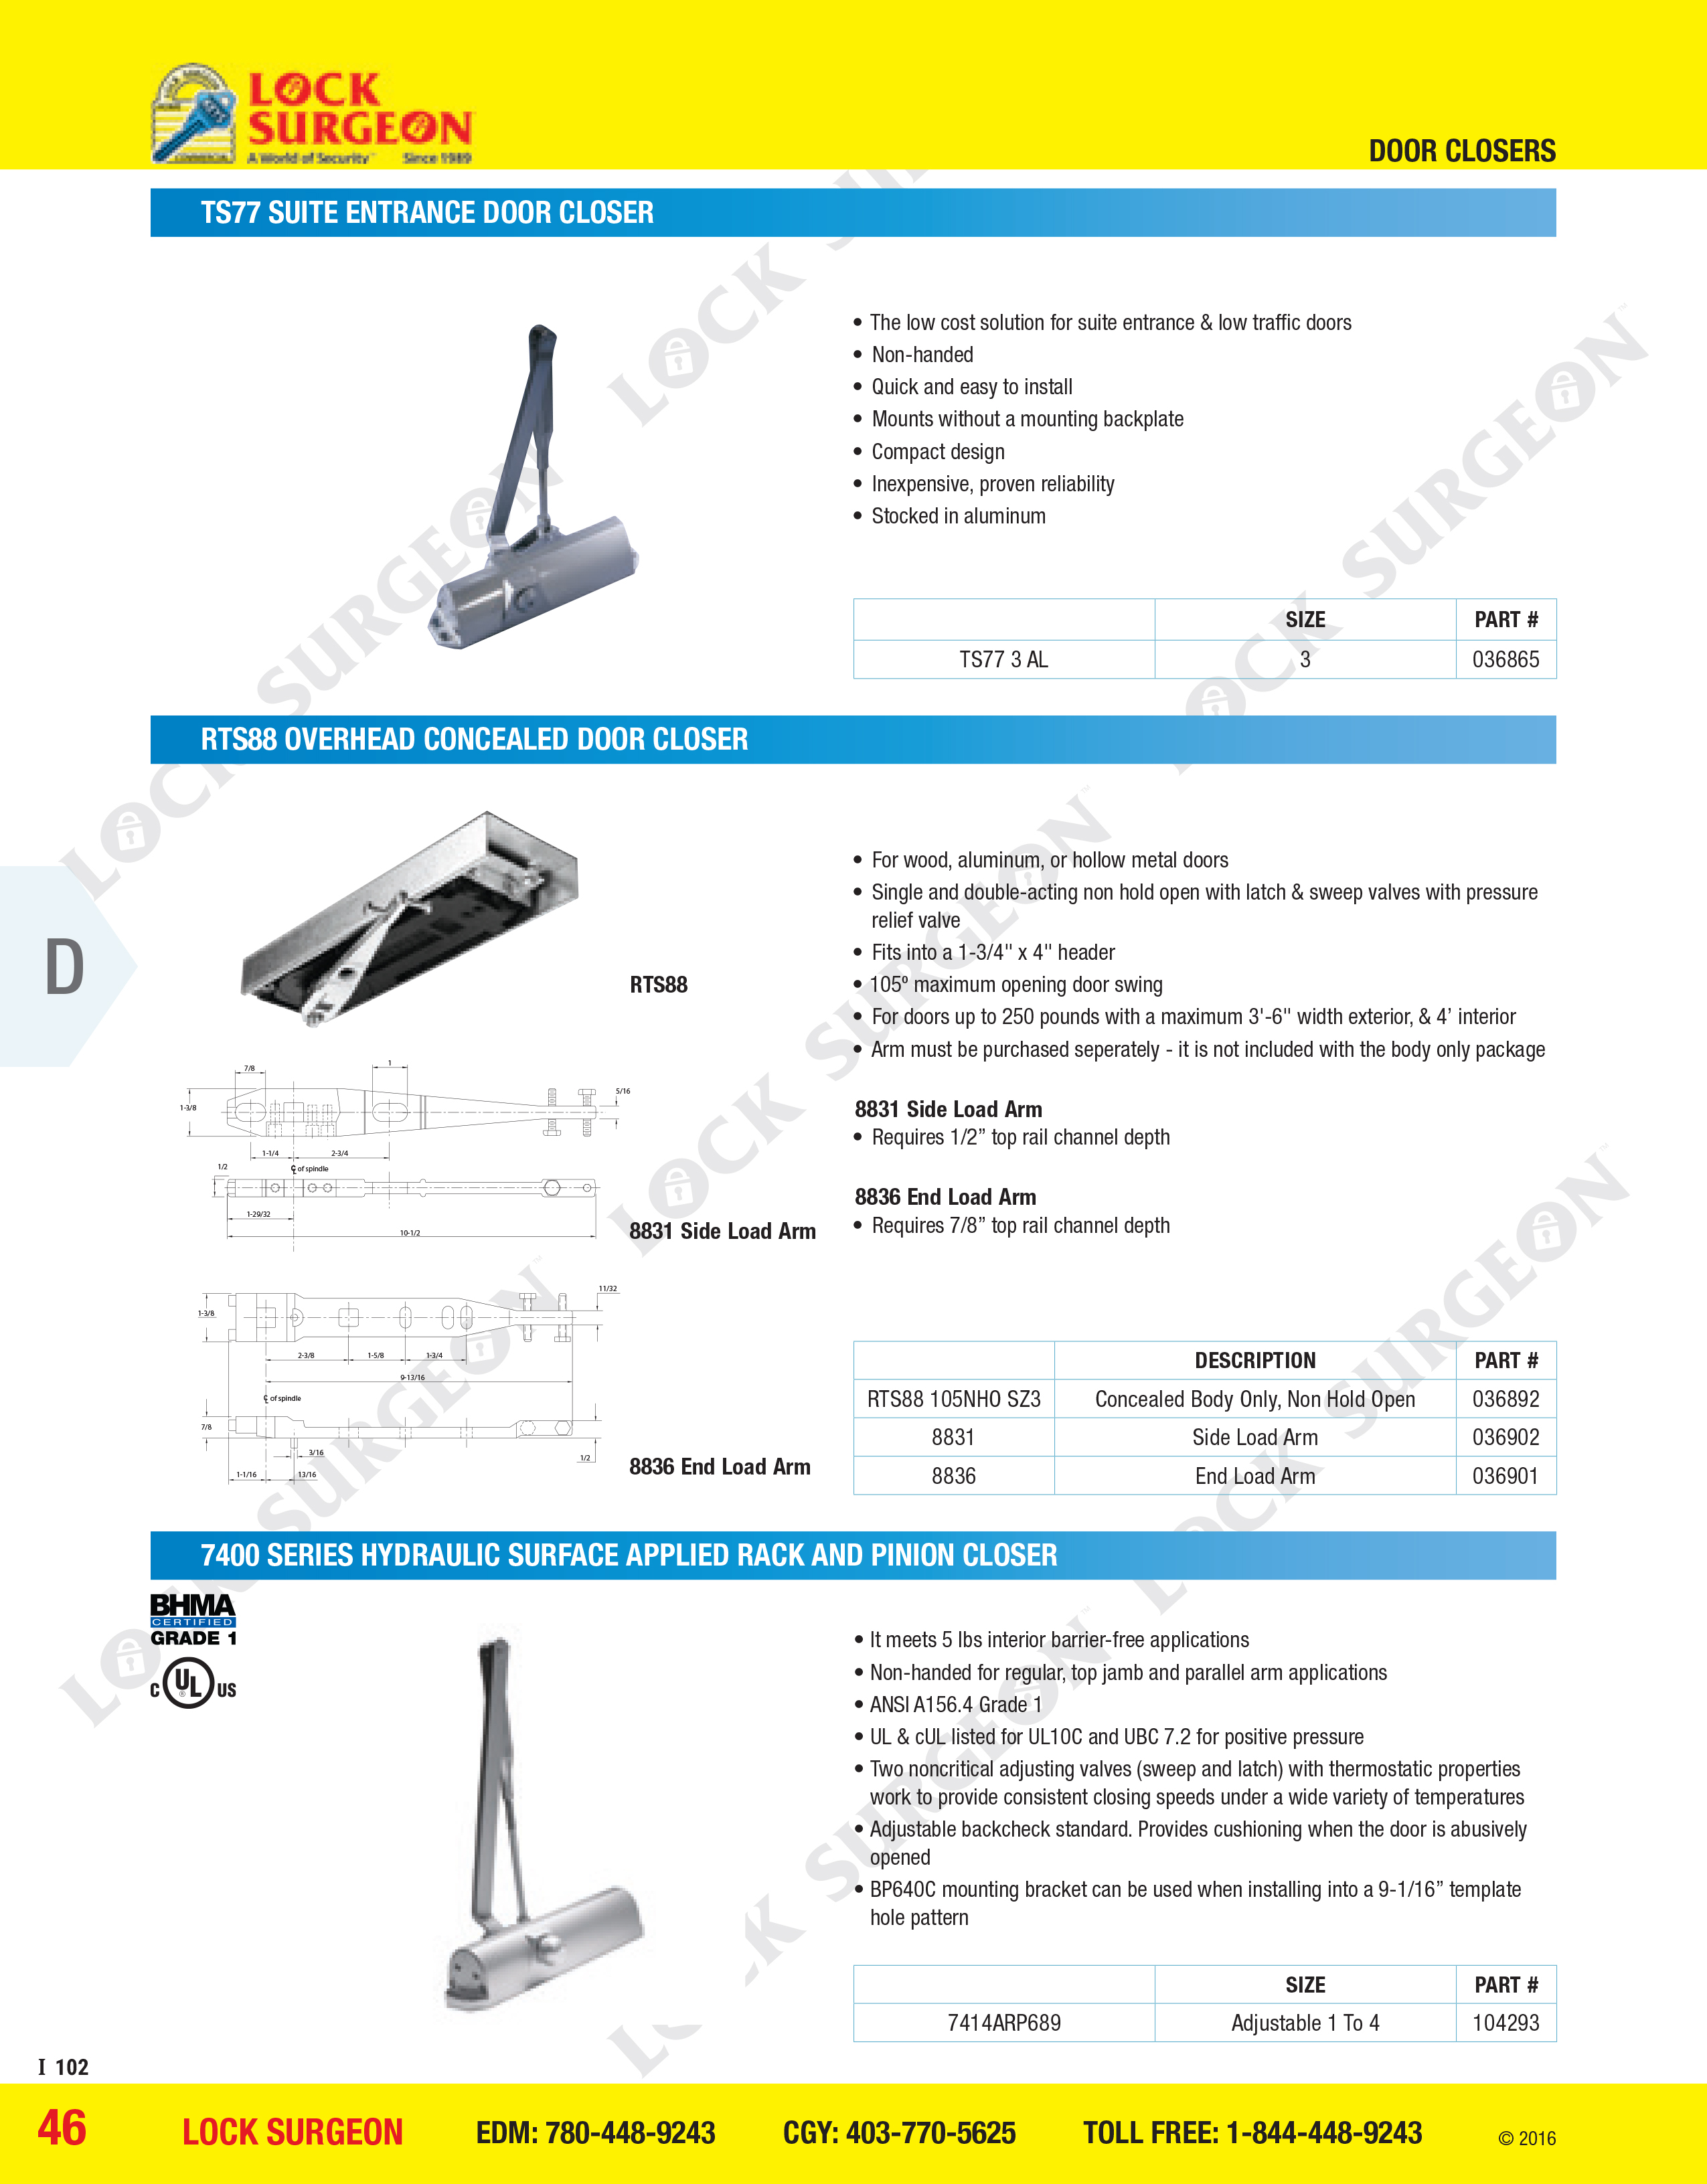 TS77 suite door closer RTS88 overhead concealed door closer 7400 series hydraulic rack and pinion